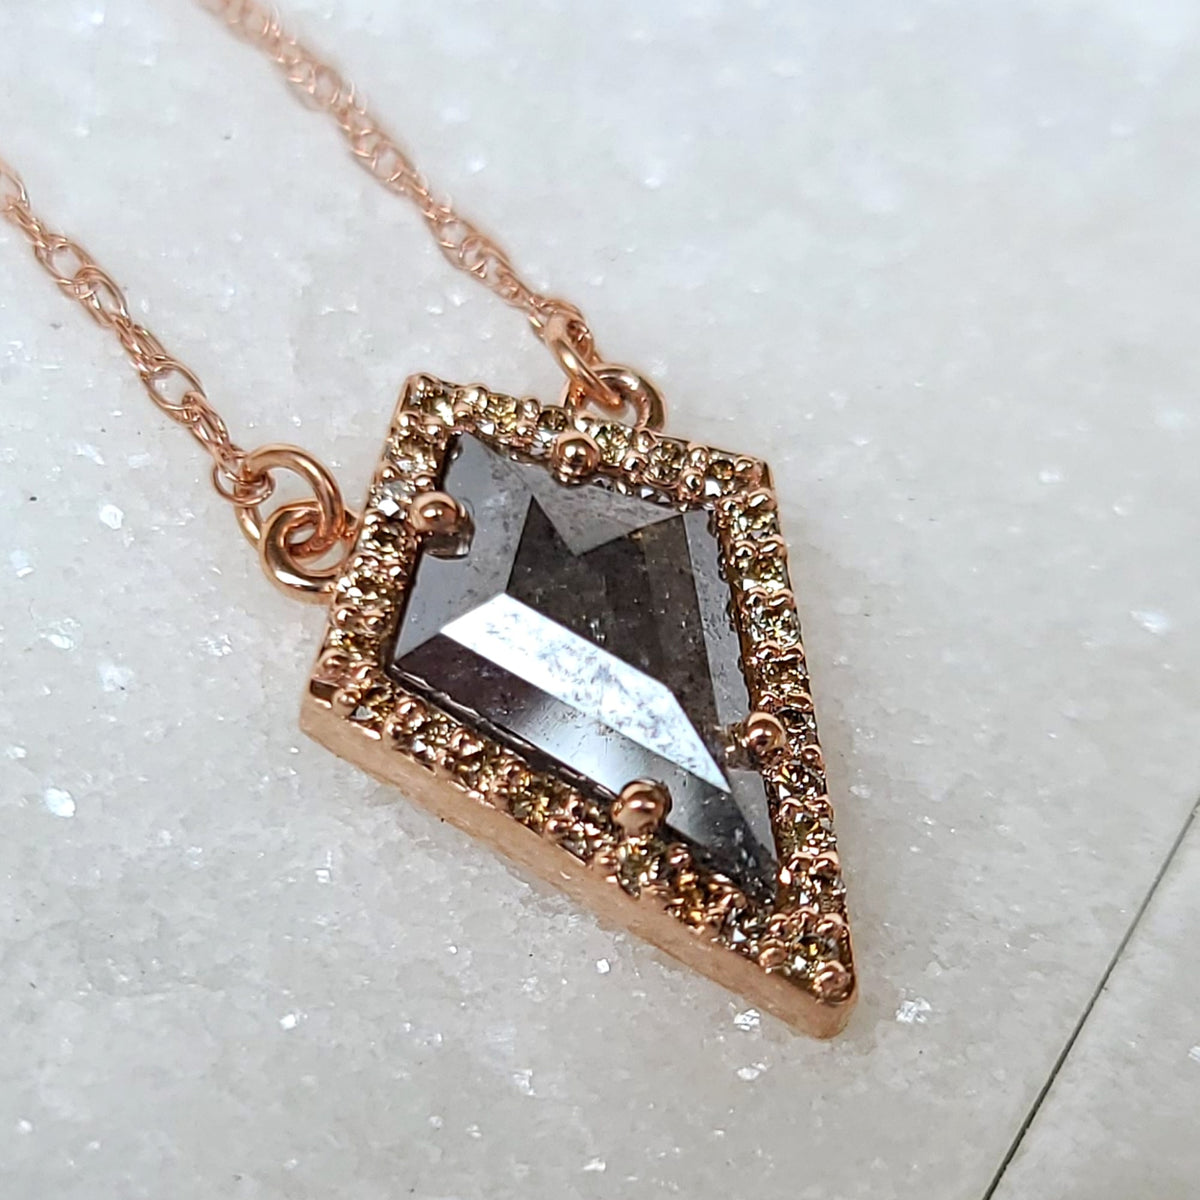 Sincerely Ginger Jewelry 14K Kite Salt and Pepper Diamond Necklace with Cognac Diamond Accents